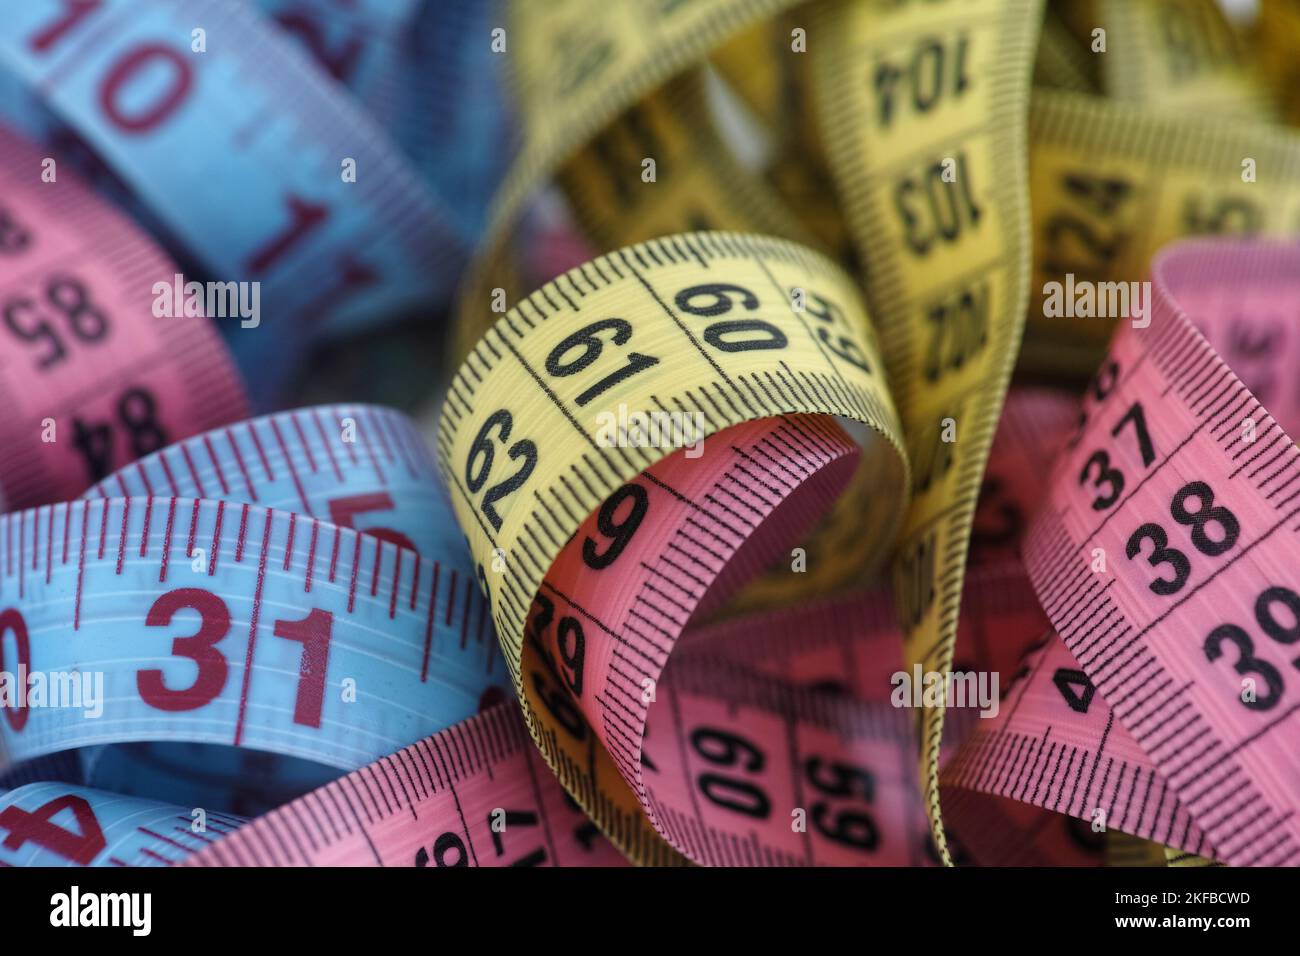 A pile of colorful measuring tapes. Close up. Stock Photo